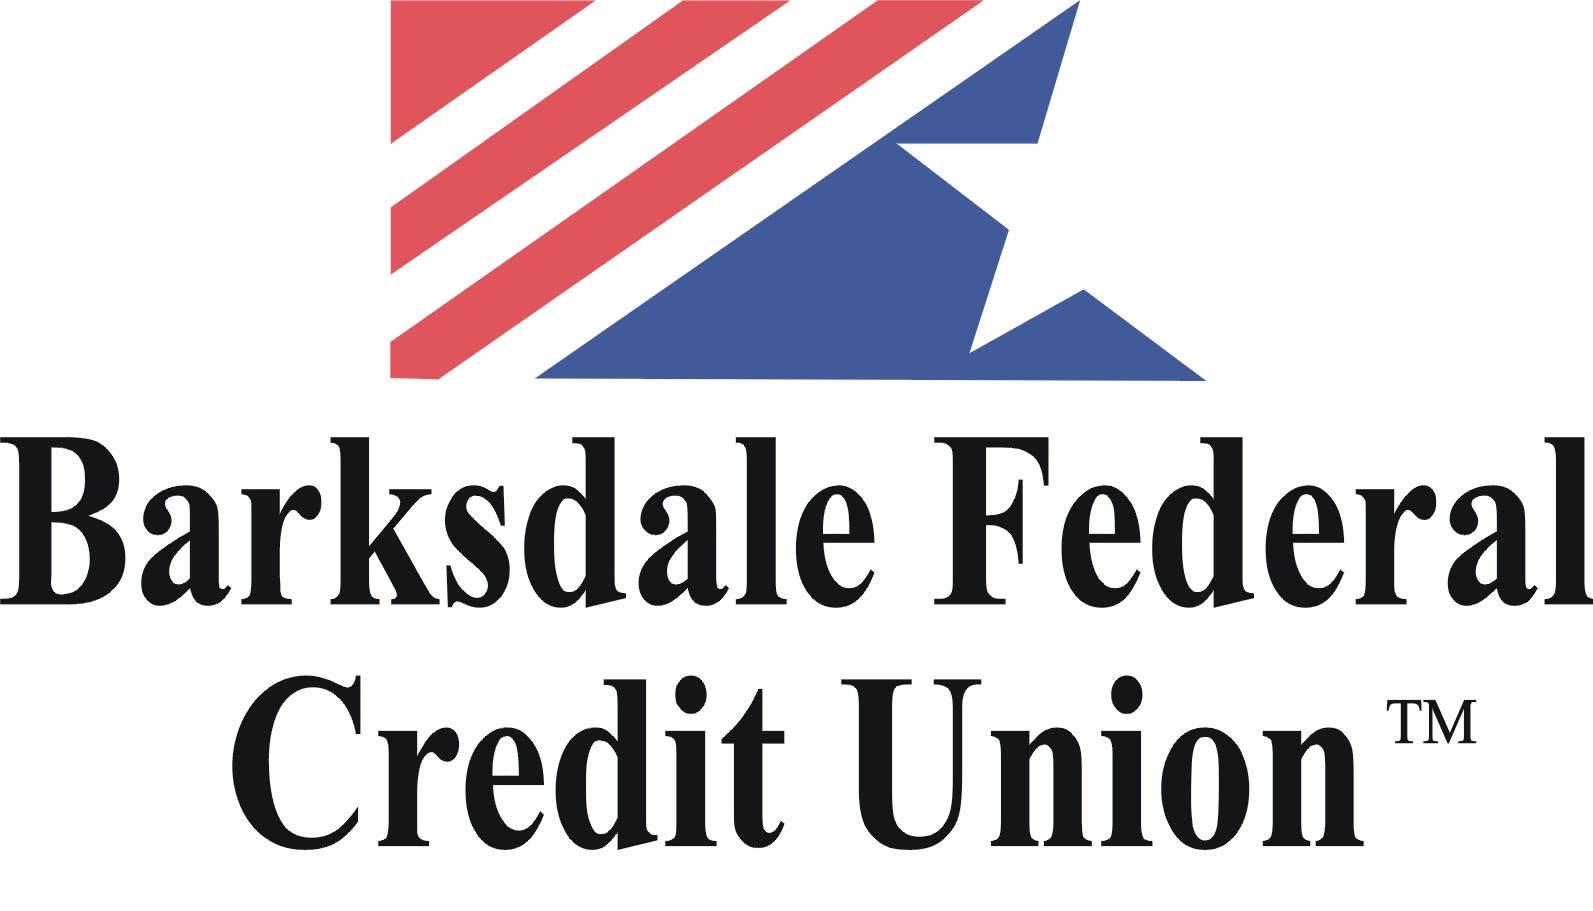 Barksdale Federal Credit Union-Stockwell Road Center